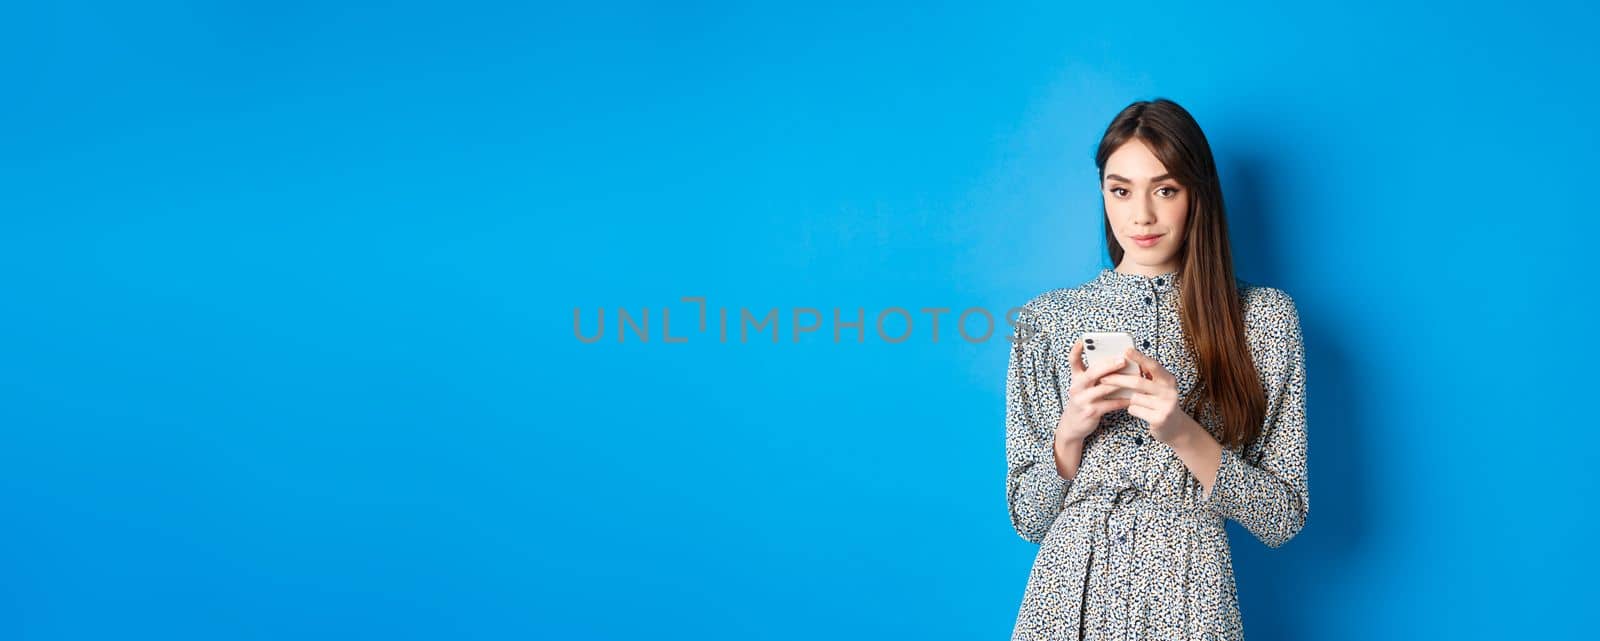 Stylish modern woman in dress, chatting on smartphone and smiling at camera, standing on blue background.